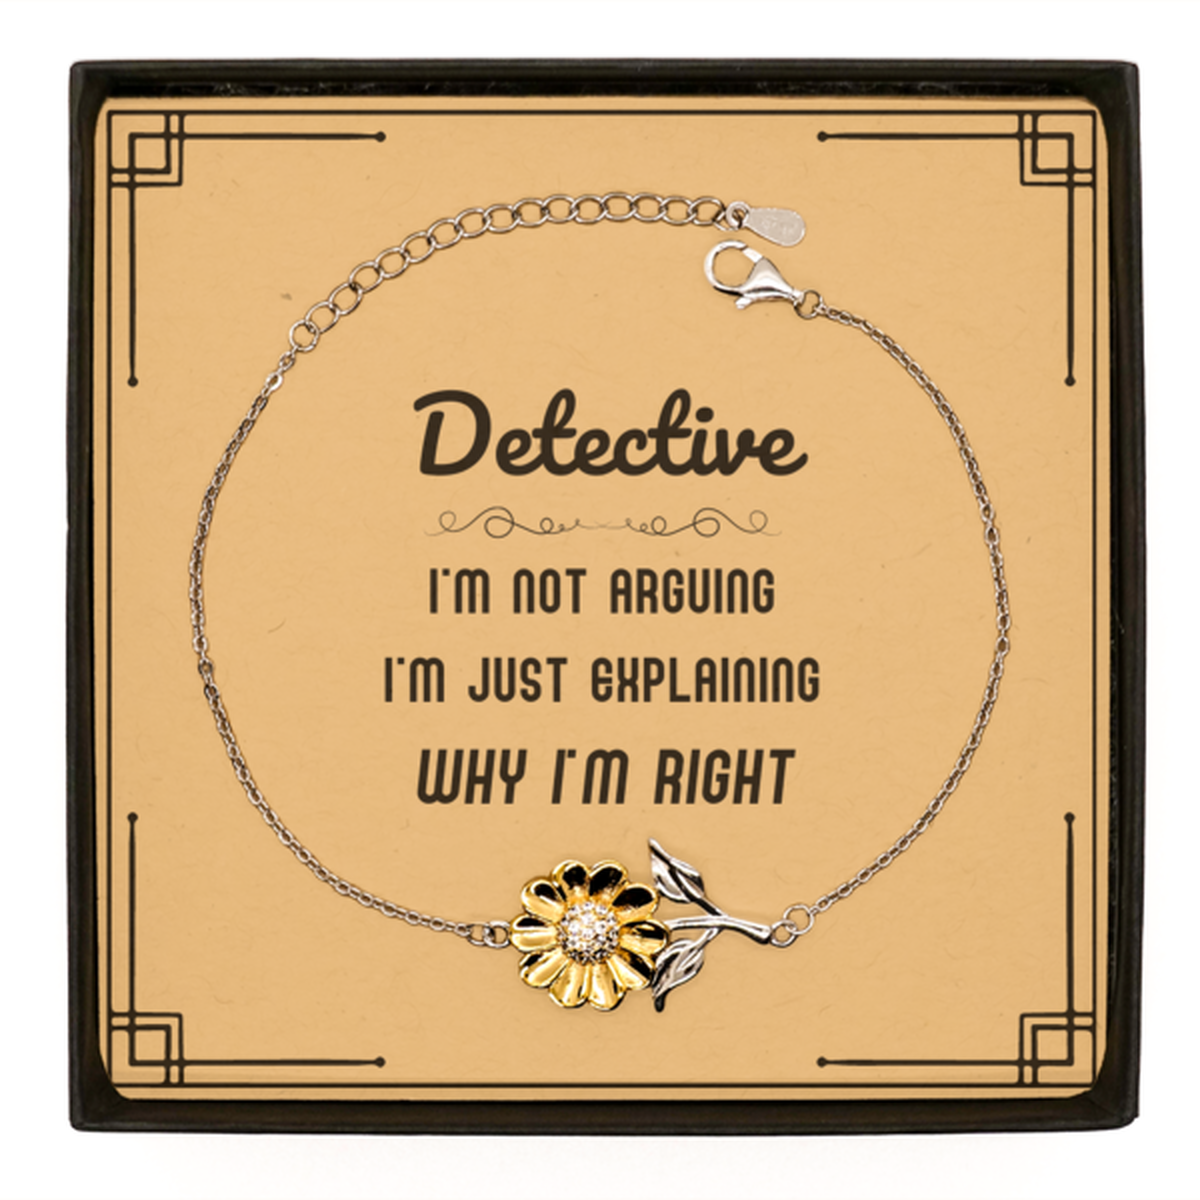 Detective I'm not Arguing. I'm Just Explaining Why I'm RIGHT Sunflower Bracelet, Funny Saying Quote Detective Gifts For Detective Message Card Graduation Birthday Christmas Gifts for Men Women Coworker